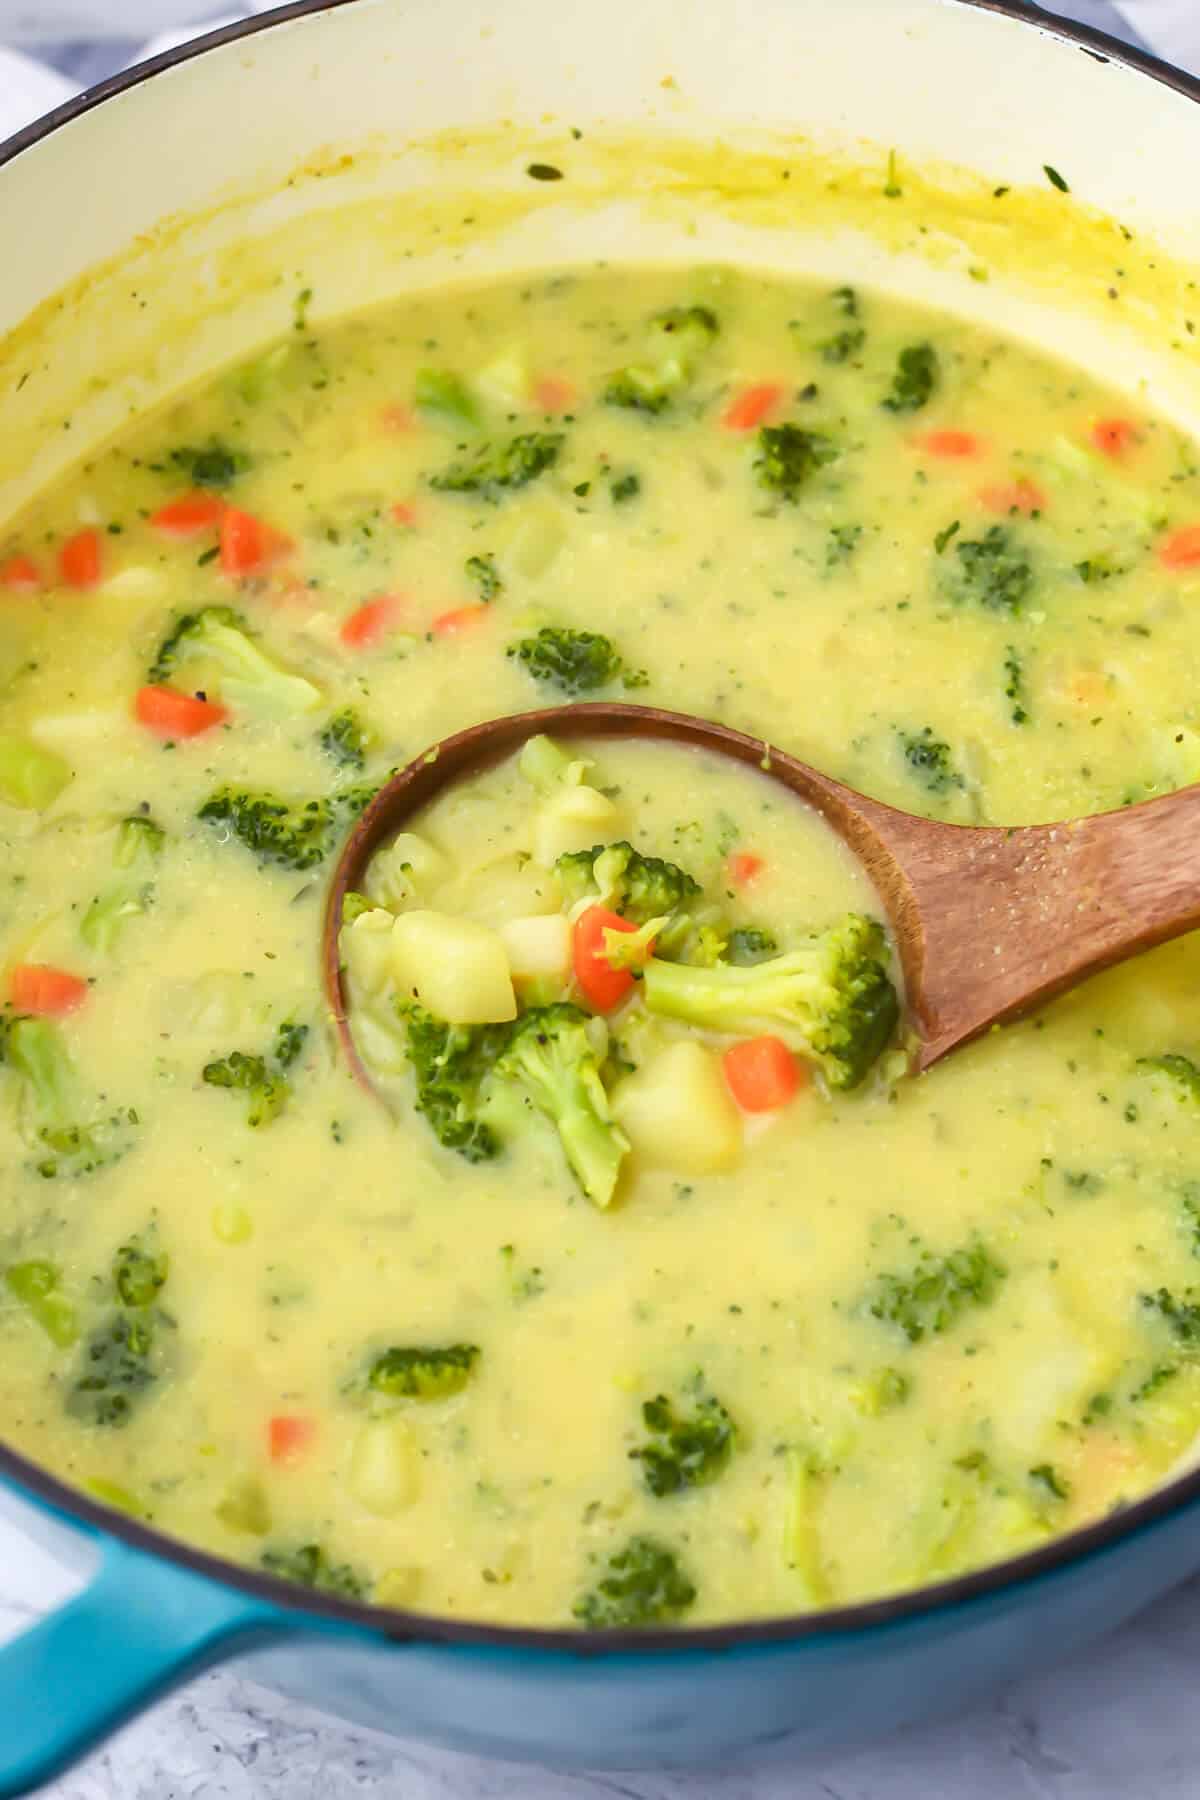 Vegan broccoli and potato soup in a large soup pot being scooped up with a wooden ladle.